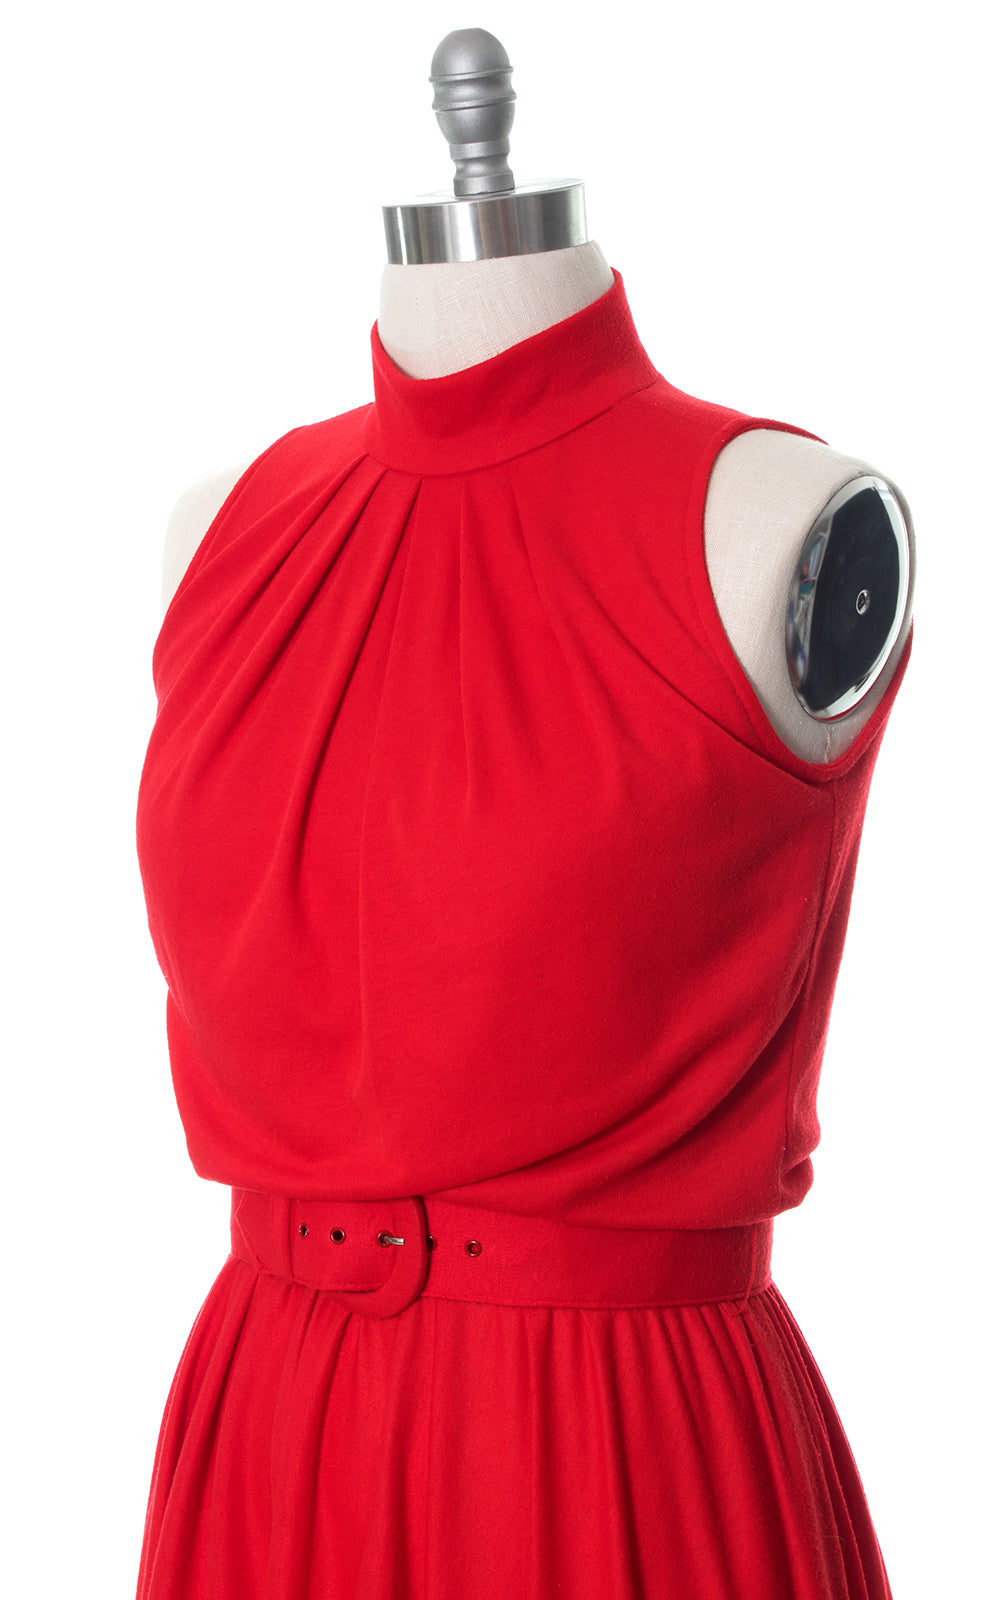 1980s Red Jersey Knit Dress with Pockets